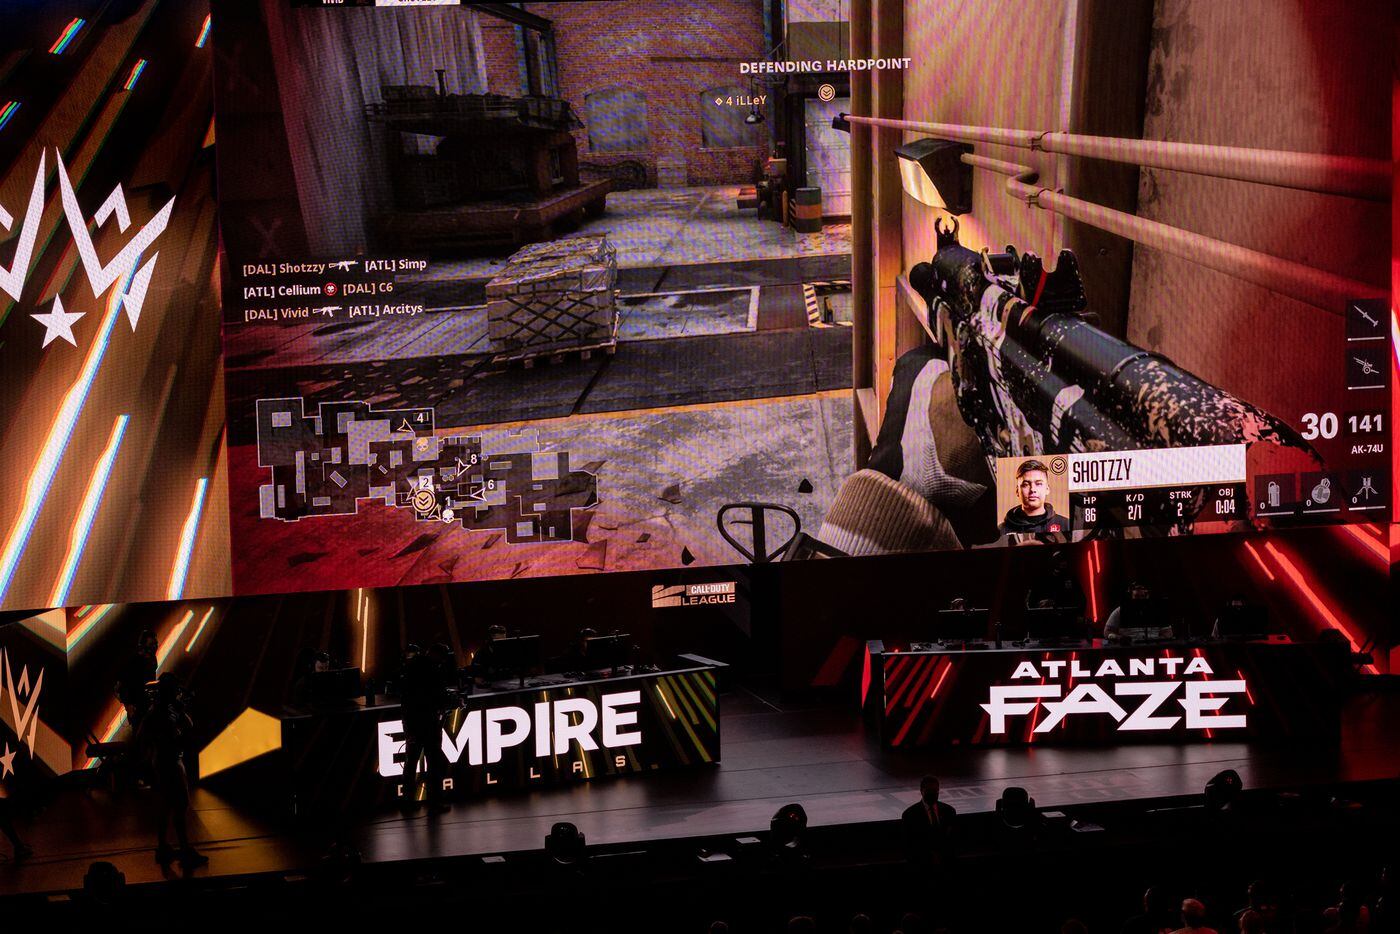 The Dallas Empire's Anthony “Shotzzy” Cuevas-Castro is seen onscreen at the start of  the winners final of the Call of Duty league playoffs against the Atlanta FaZe  at the Galen Center on Saturday, August 21, 2021 in Los Angeles, California. The Empire lost to FaZe 0 - 3 in their first match of the day but are still in contention to play in the finals through the elimination finals. (Justin L. Stewart/Special Contributor)